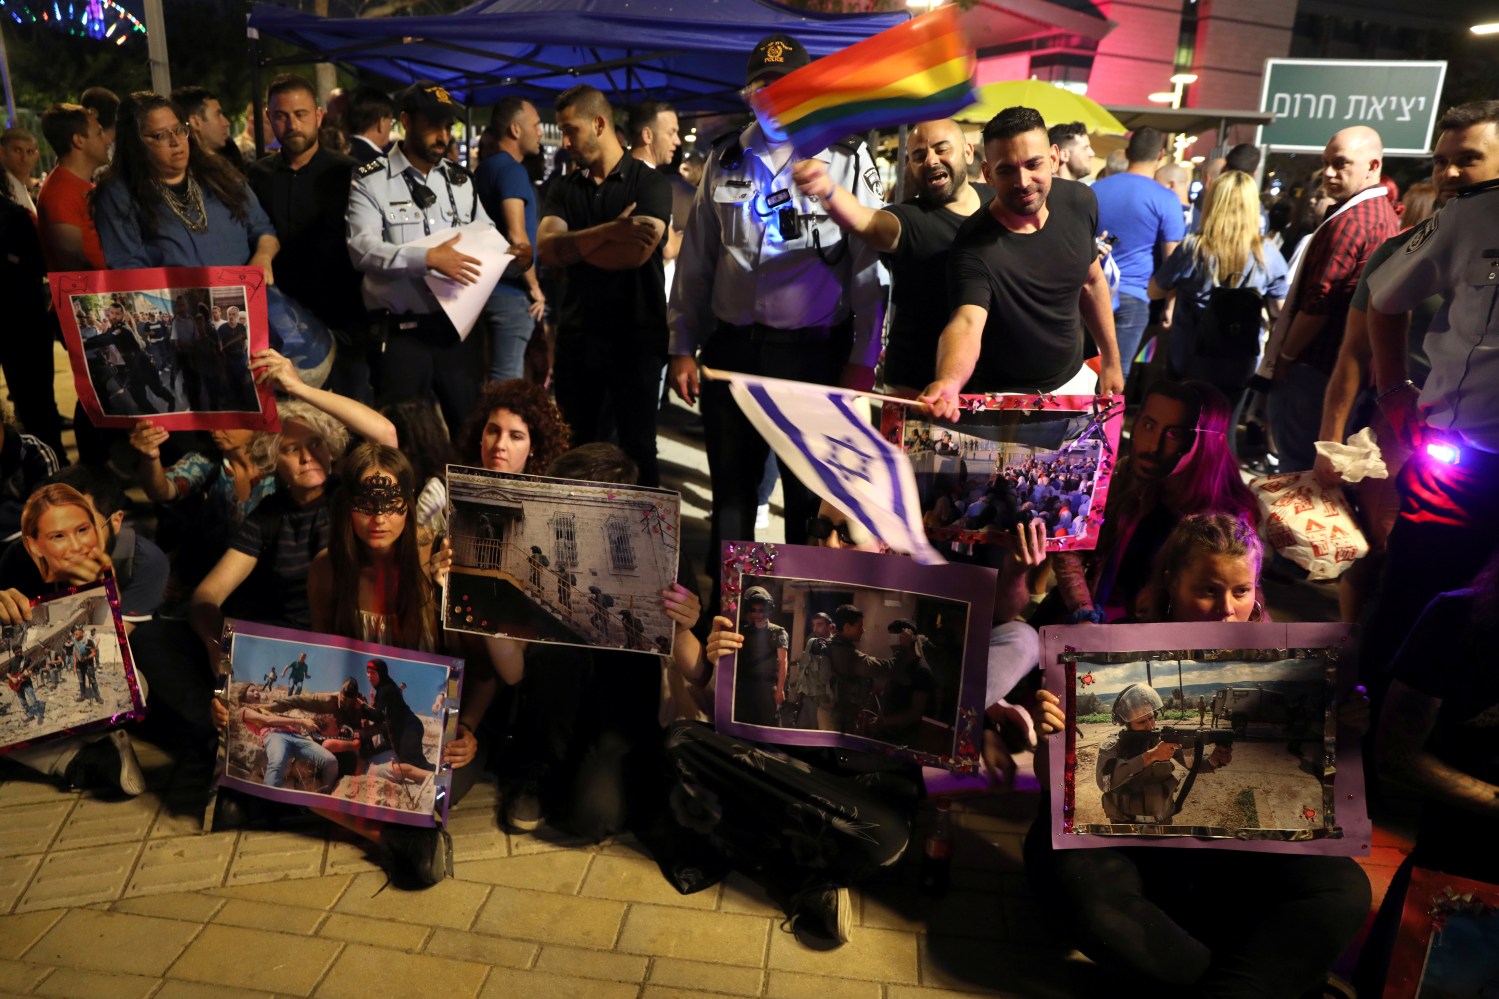 Supporters of the 'BDS' movement protest outside the venue where the 2019 Eurovision song contest final is about to take place in Tel Aviv, Israel May 18, 2019. REUTERS/Ammar Awad